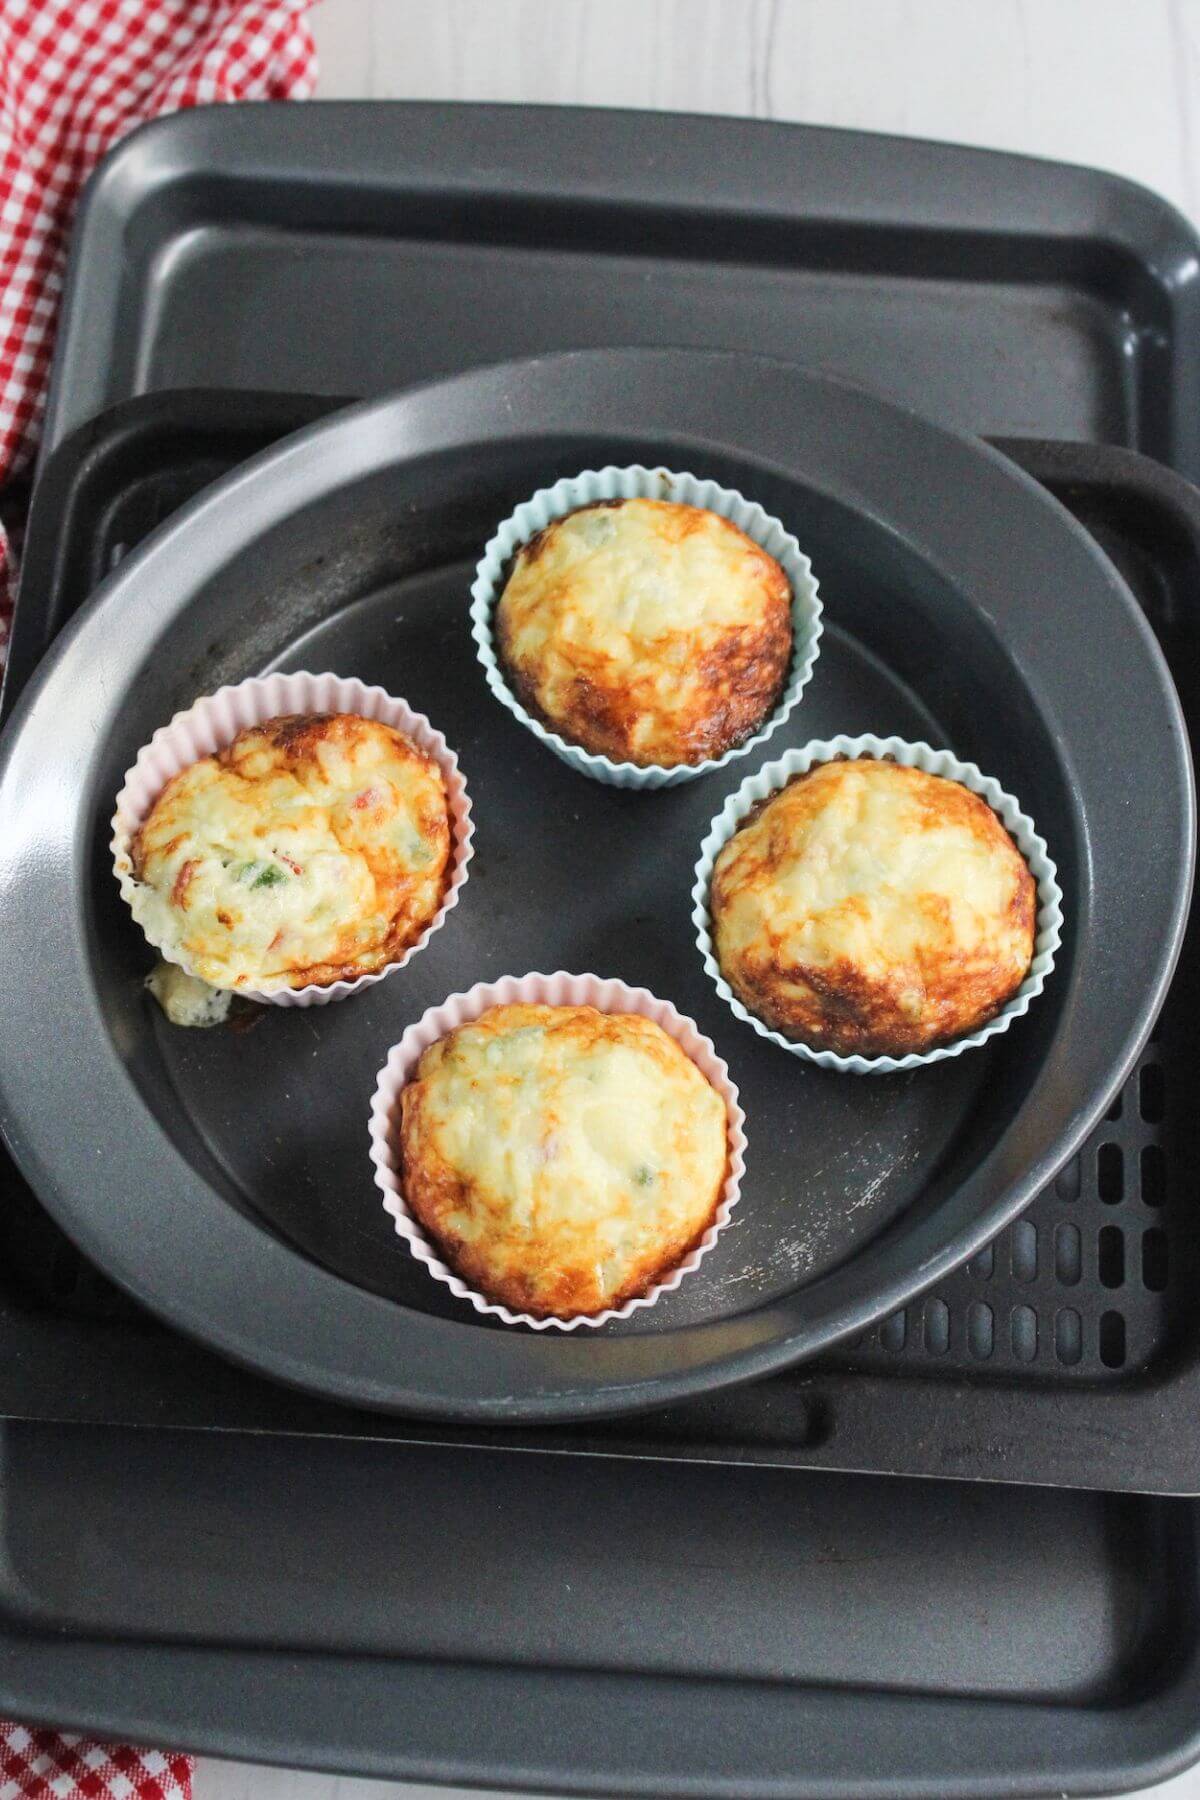 A group of egg white frittata muffins in a pan on air fryer tray.